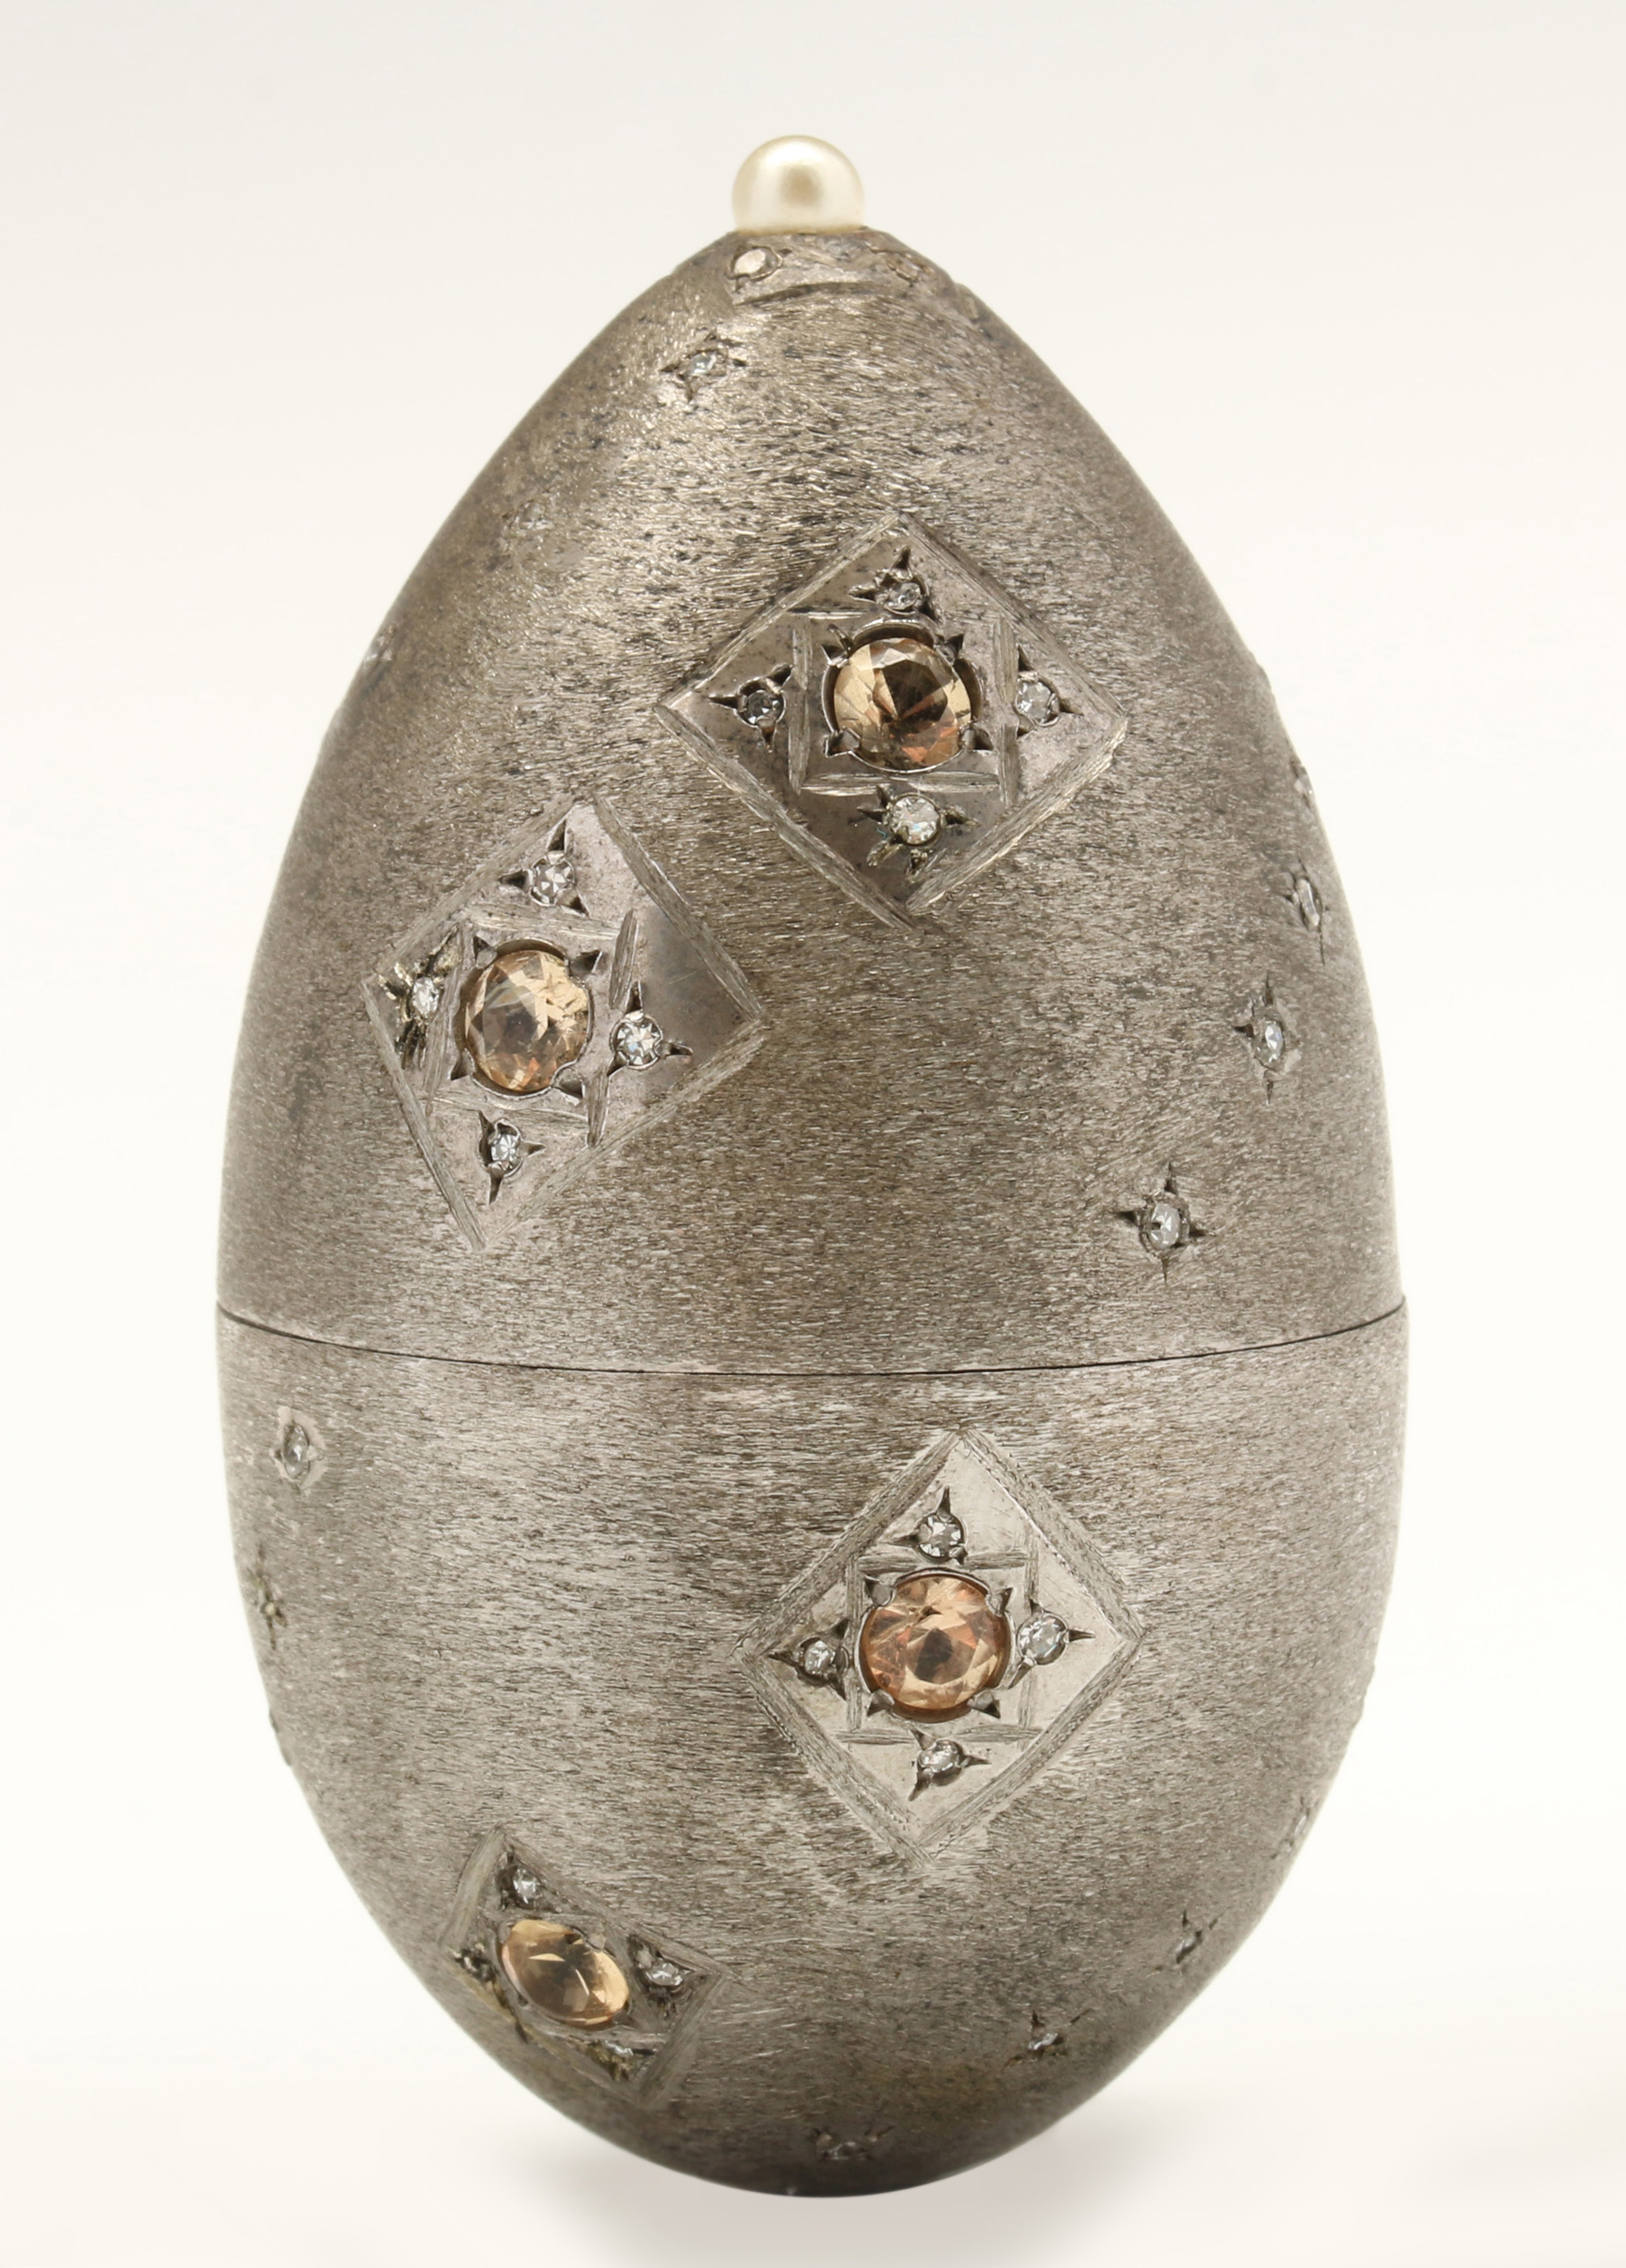 A BRUSHED METAL EGG SHAPE CONTAINER WITH GEMSTONES